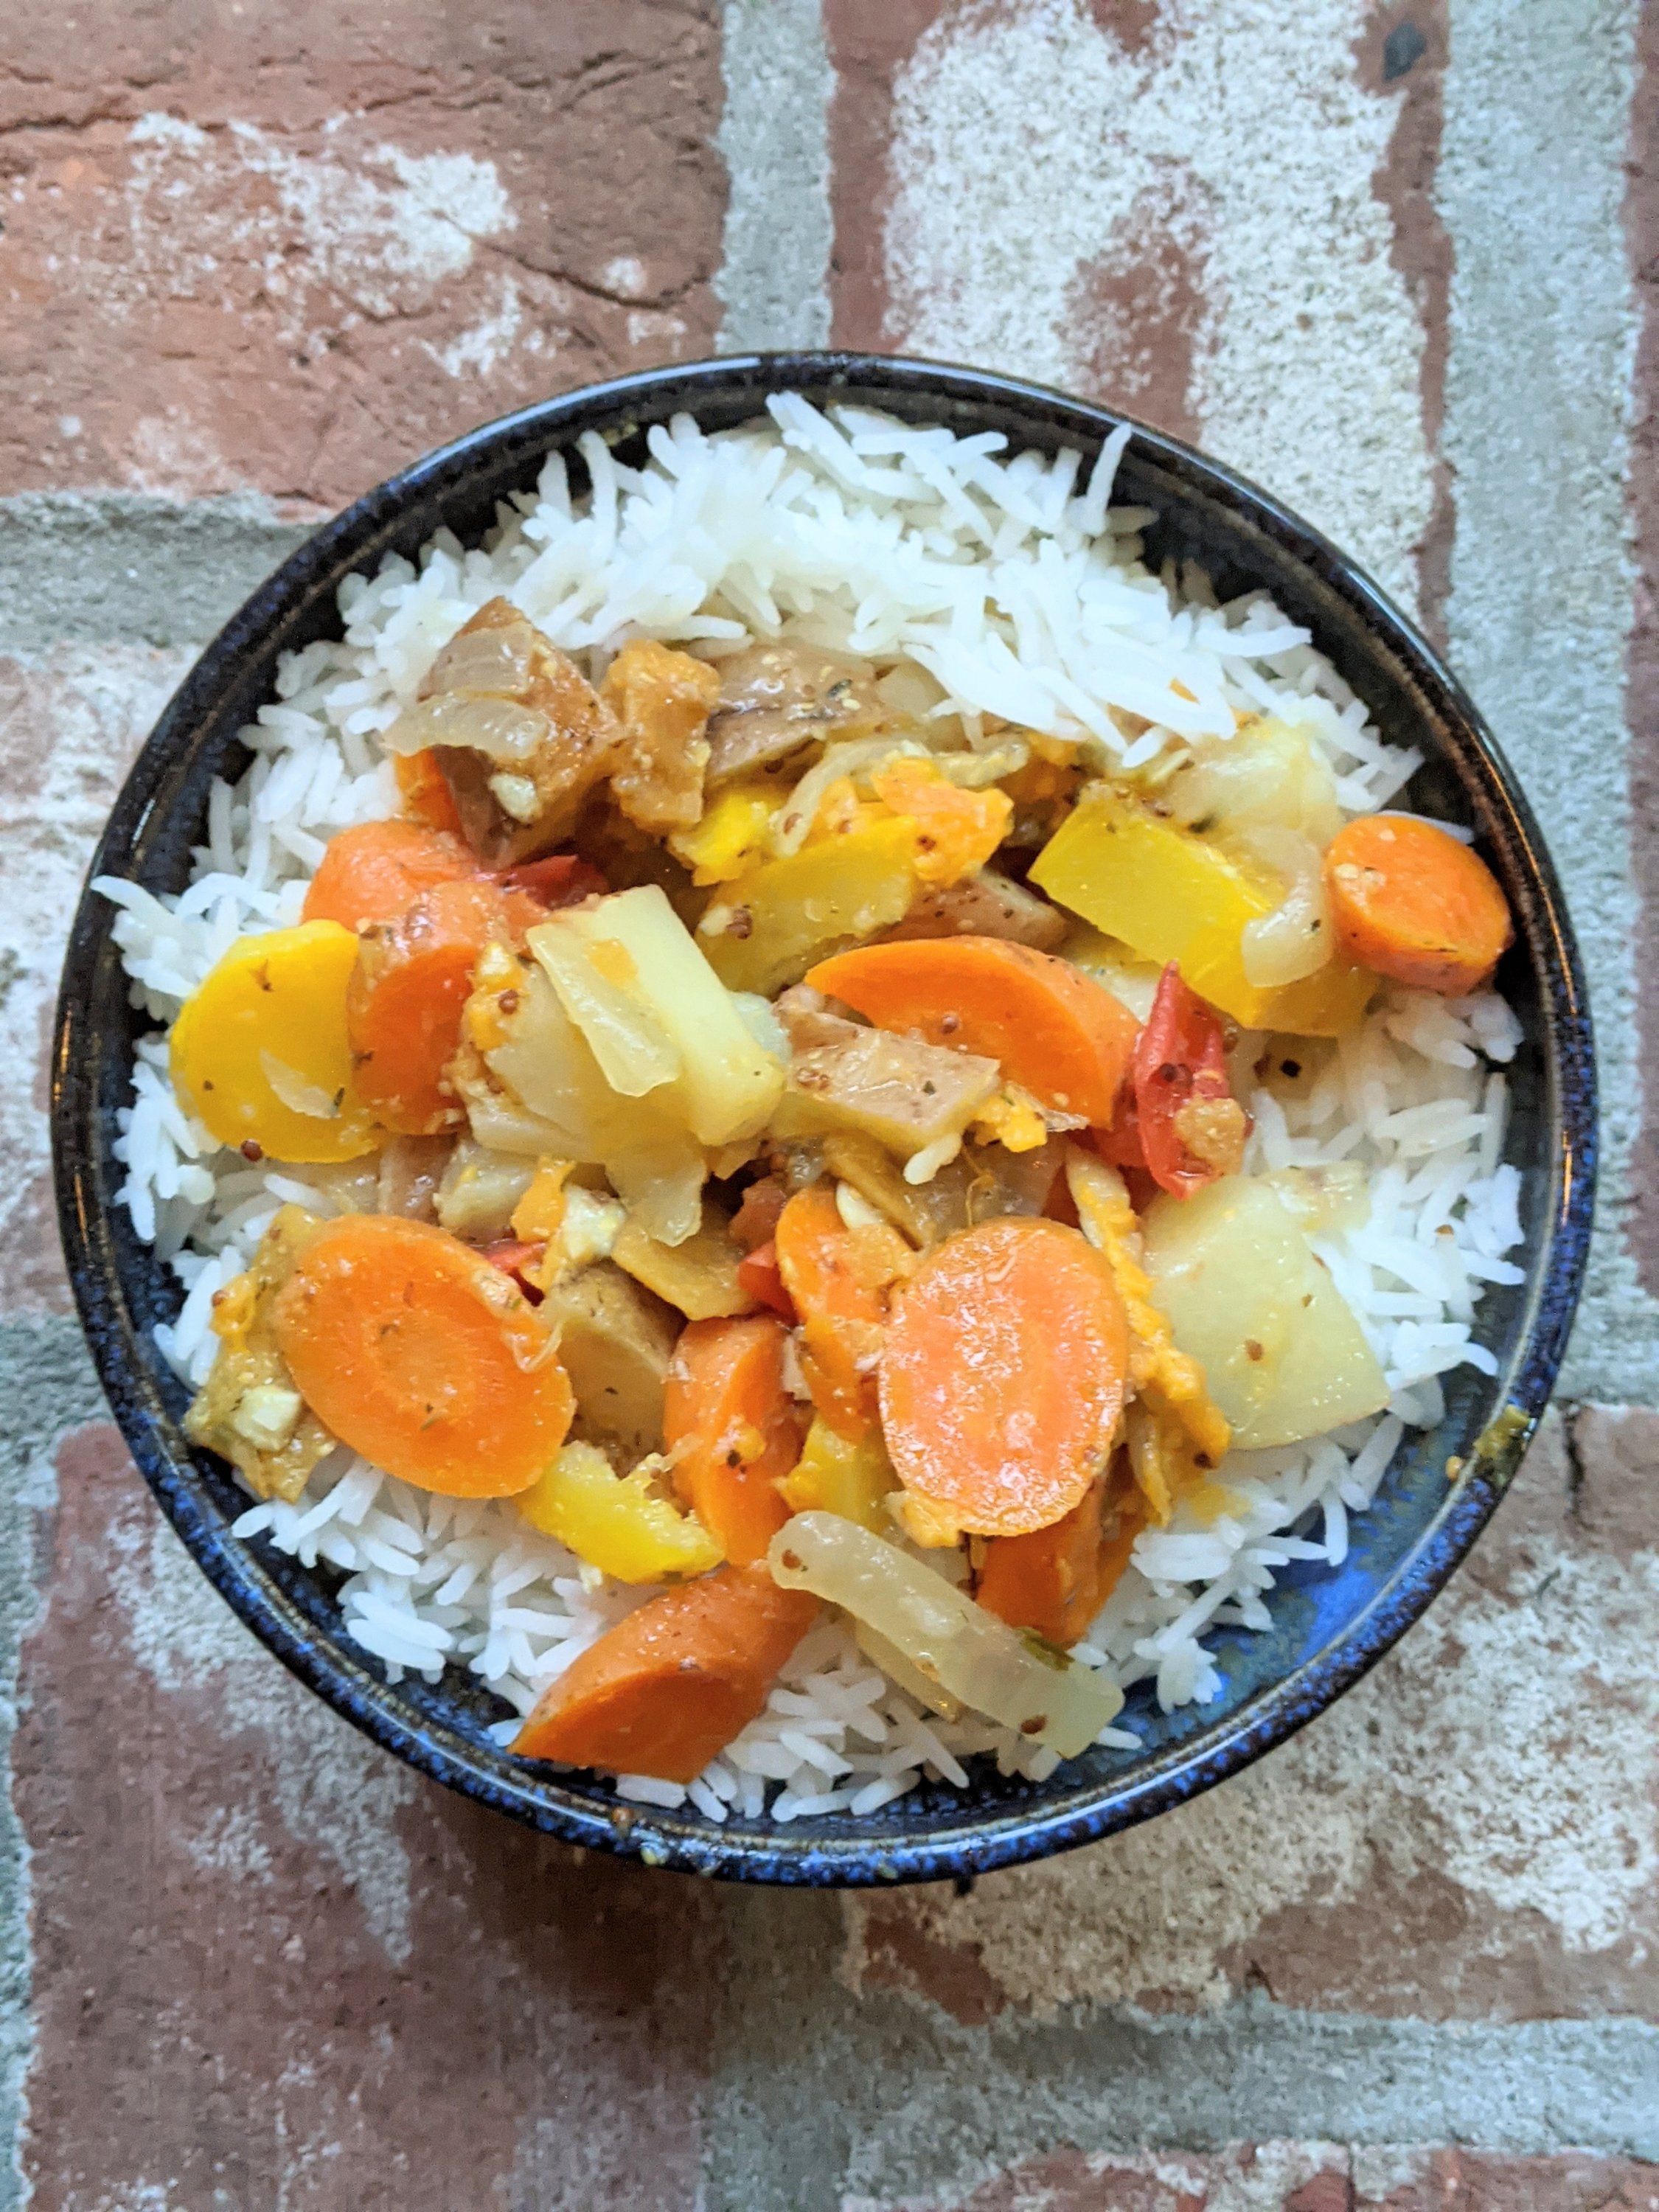 fancy side dishes instant pot vegan gluten free vegetarian healthy root vegetable stew with carrots potatoes sweet potatoes onion garlic and parsnips in lemon caper sauce